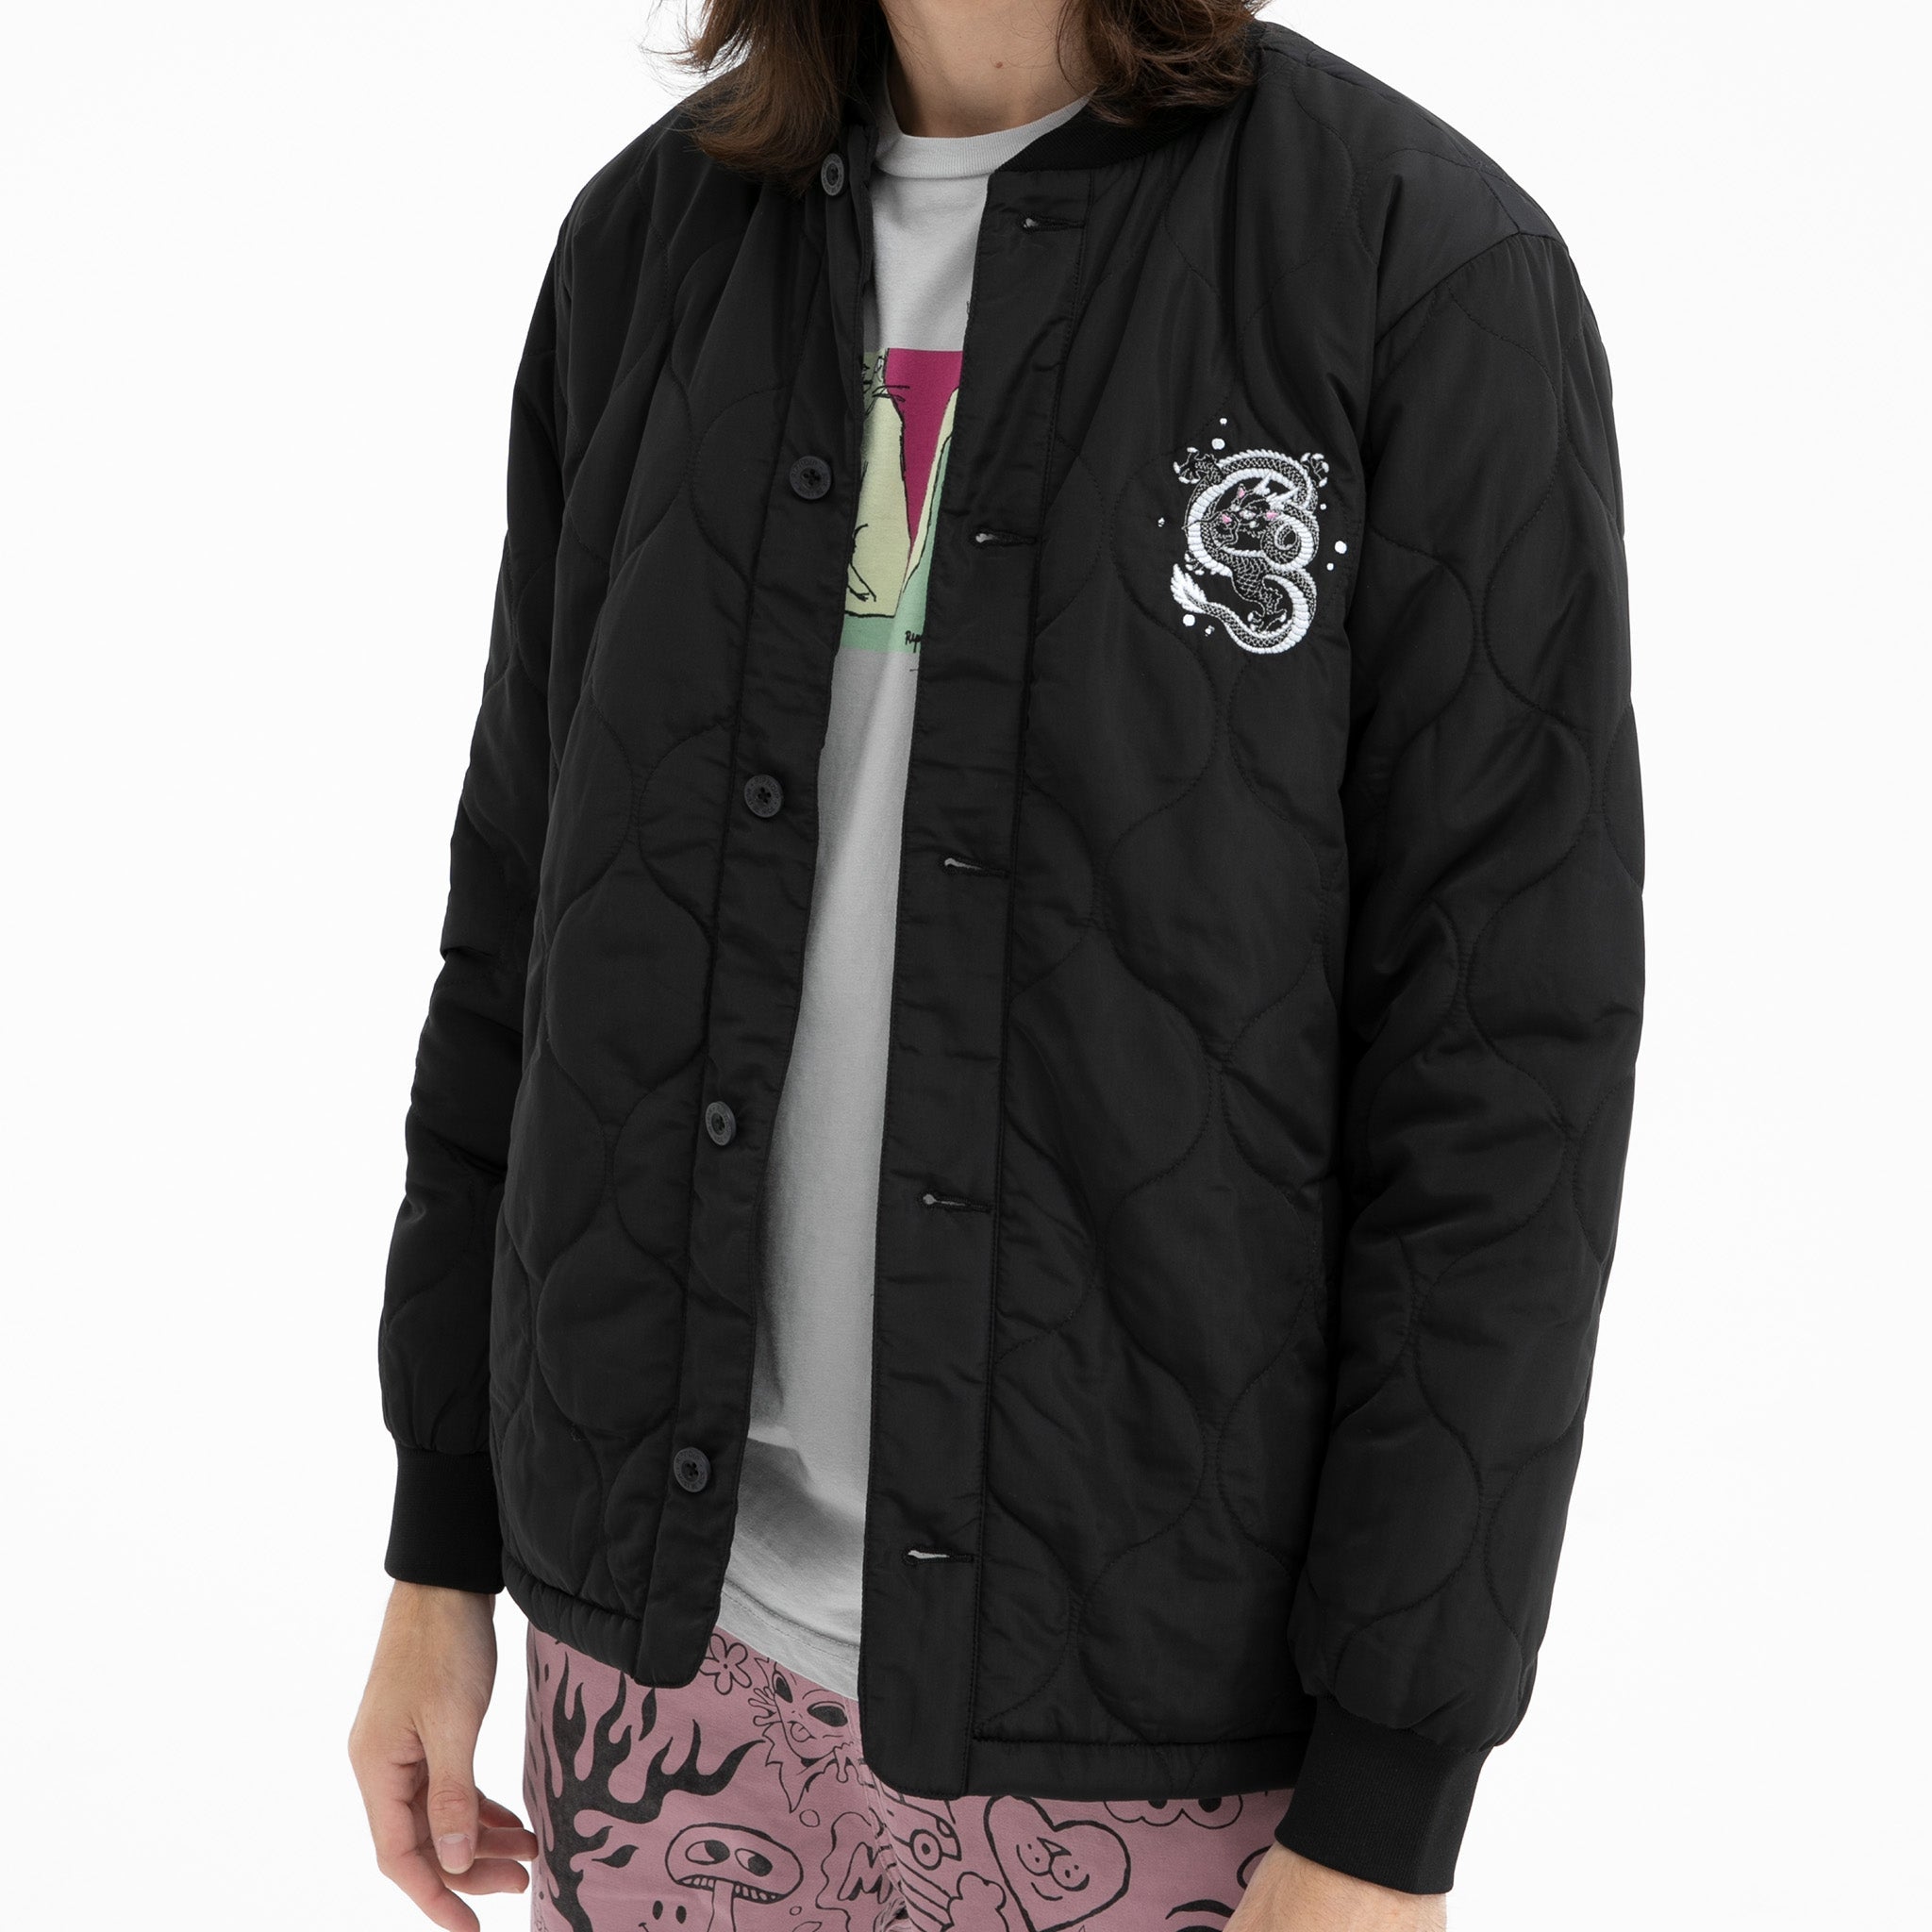 Mystic Jerm Quilted Bomber Jacket (Black)